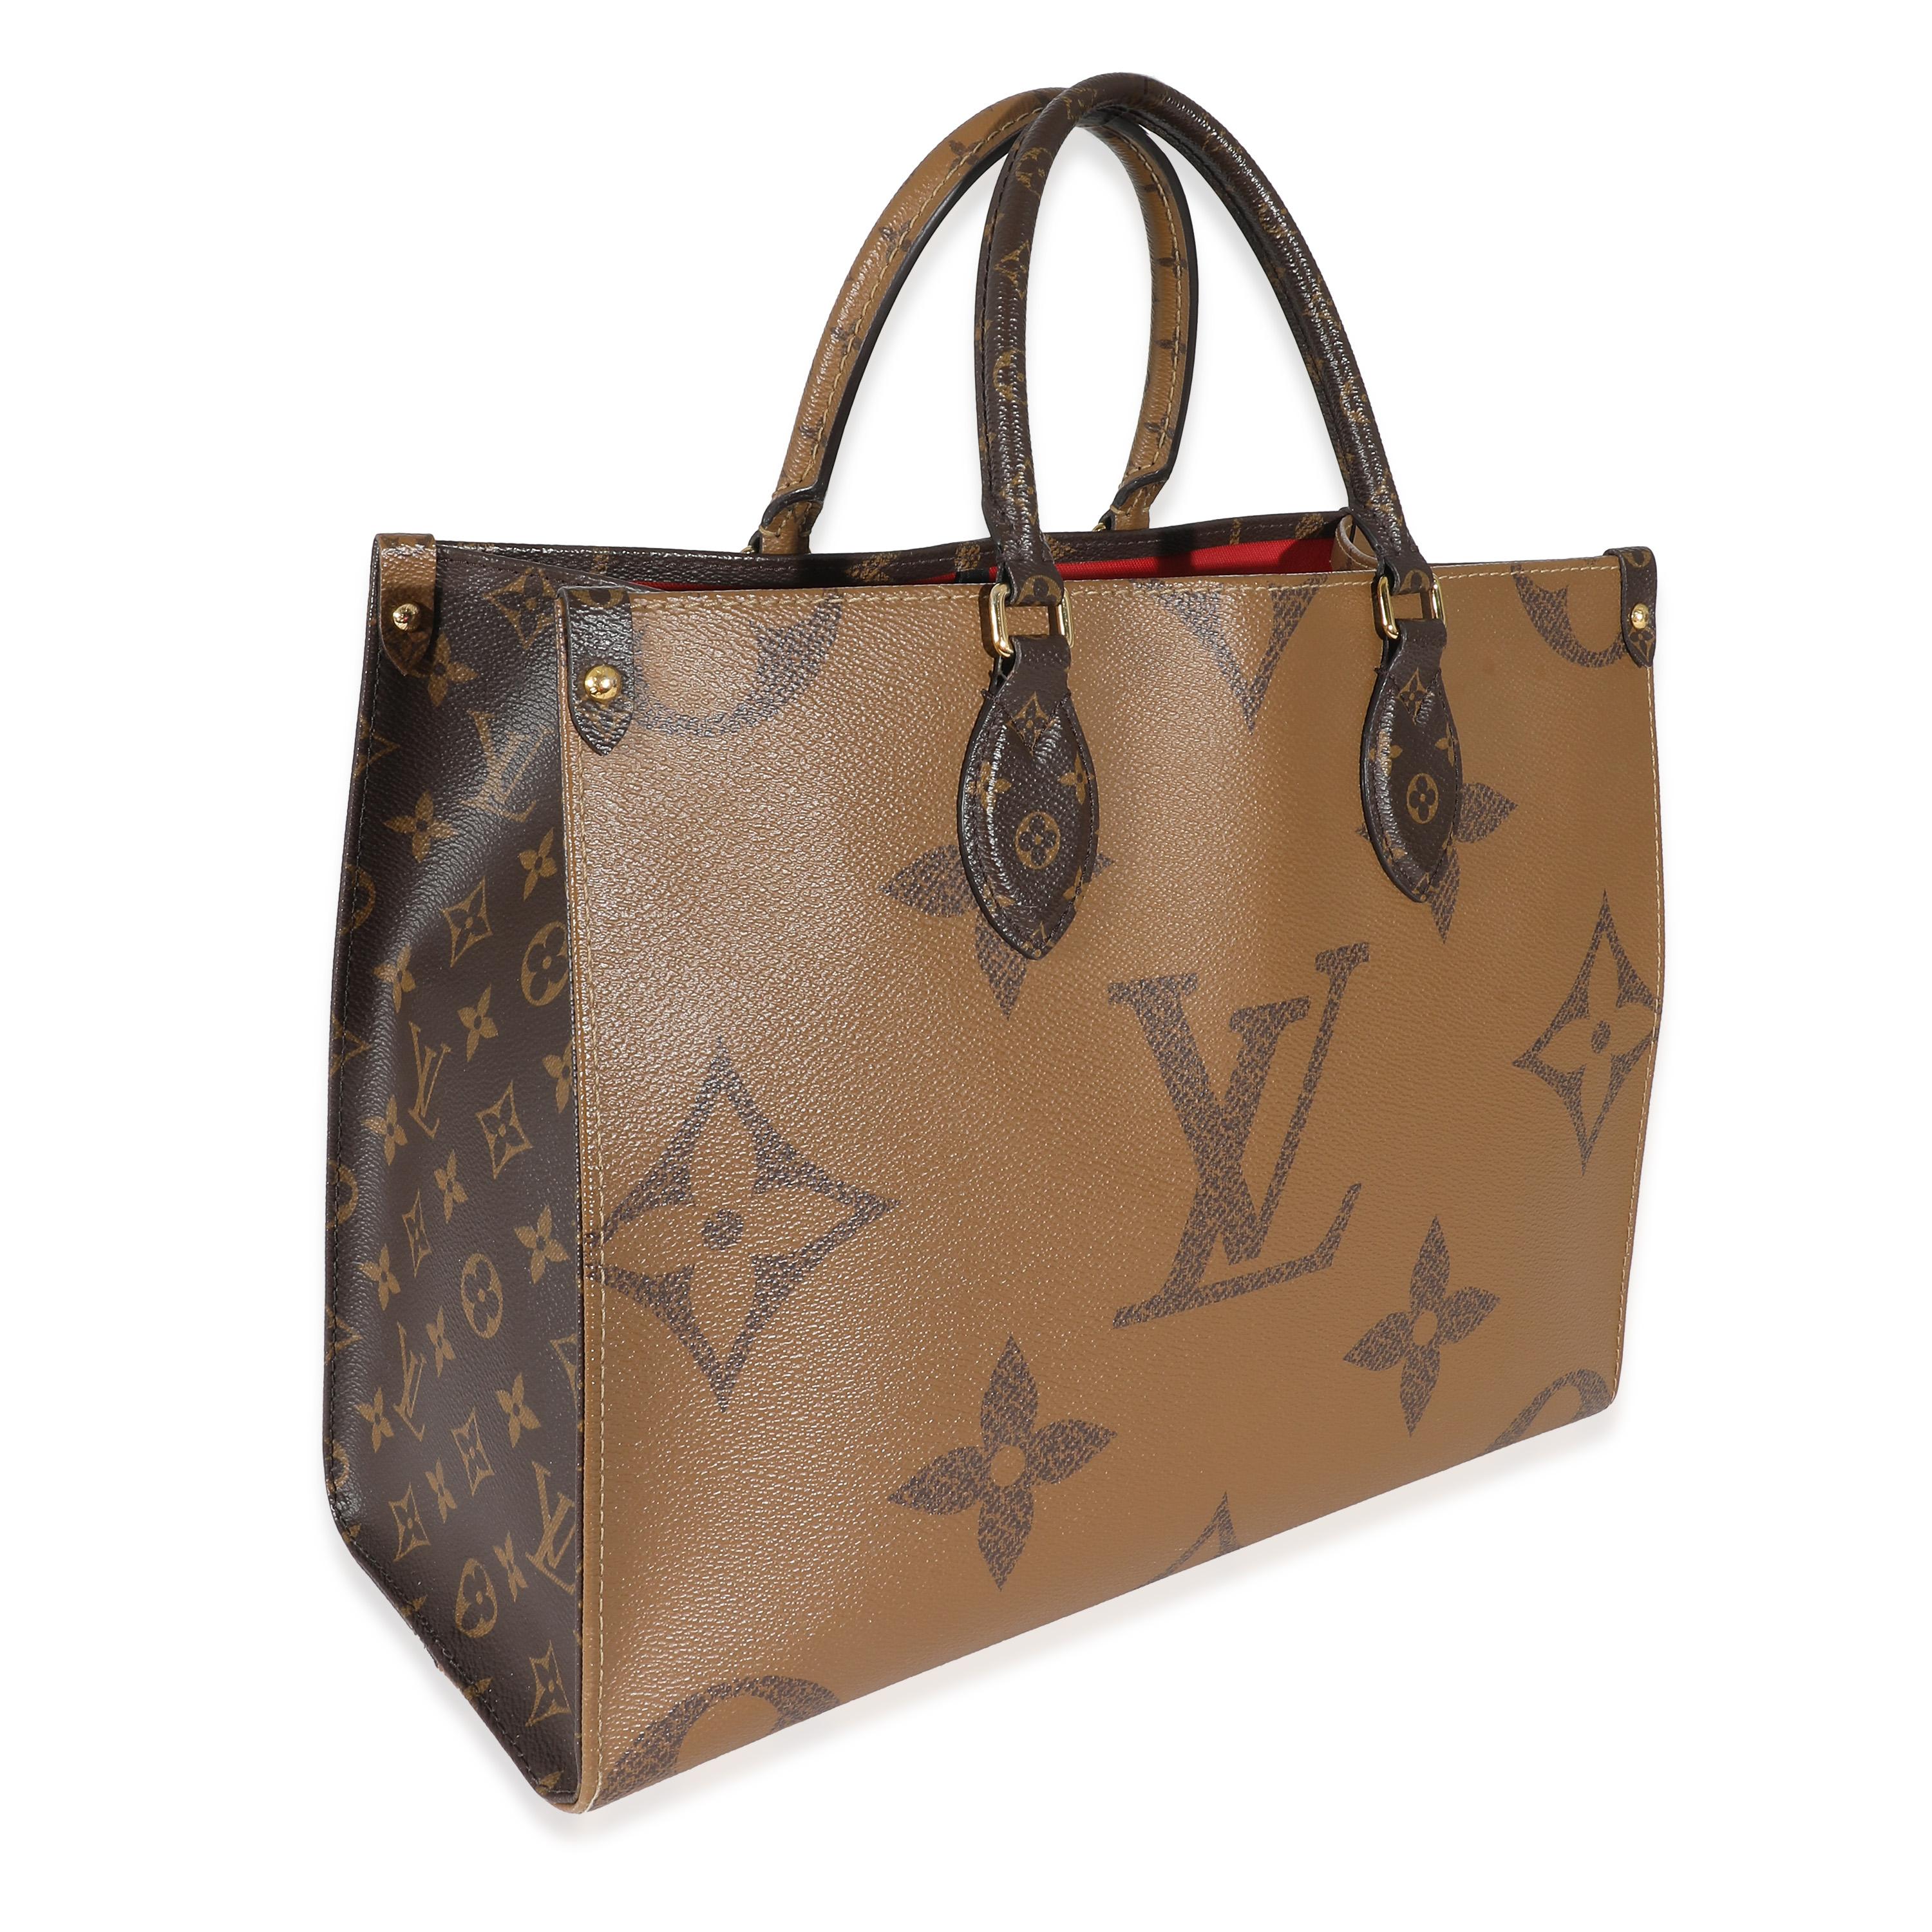 Listing Title: Louis Vuitton Reverse Monogram Giant Canvas Onthego MM
SKU: 136135
MSRP: 3100.00 USD
Condition: Pre-owned 
Condition Description: This bag says it all. The Onthego bag from Louis Vuitton is designed for busy lifestyles. Topped with